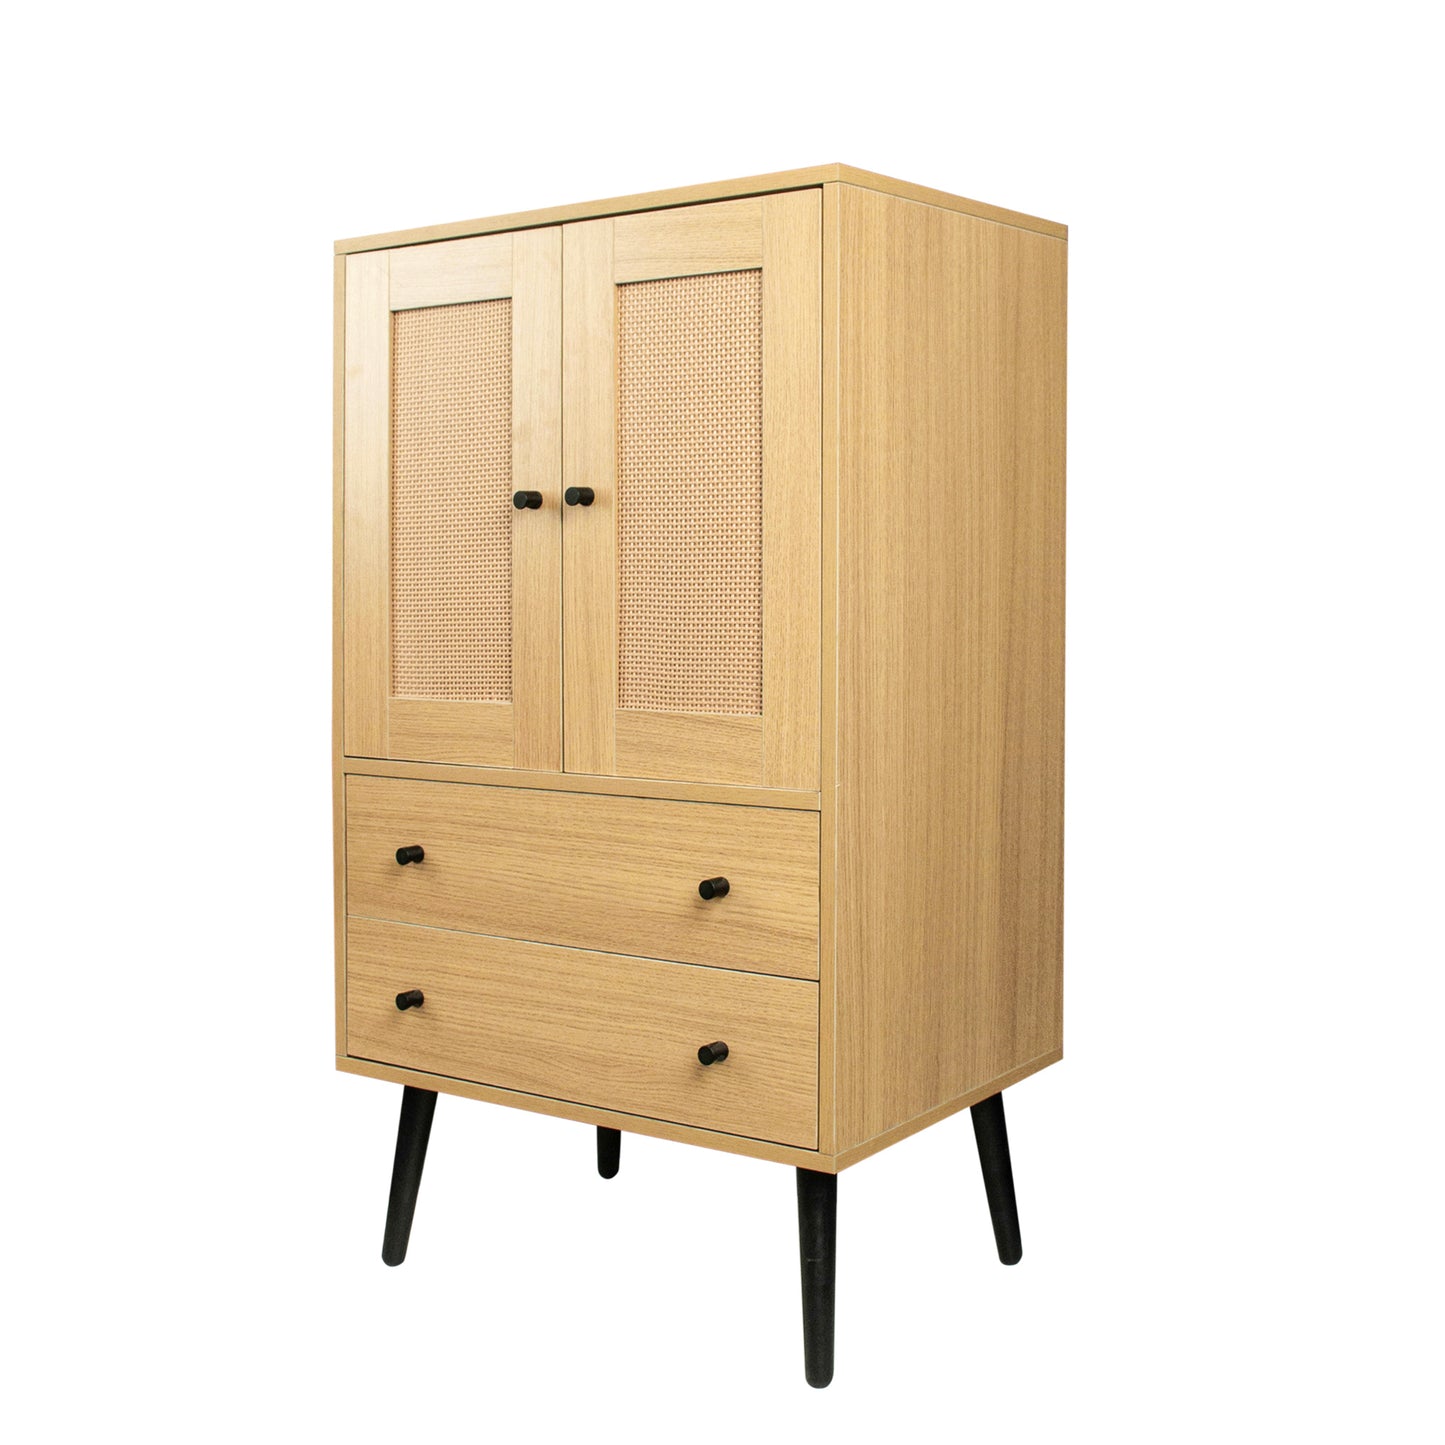 Wooden Sideboard with 2 doors and 2 drawers